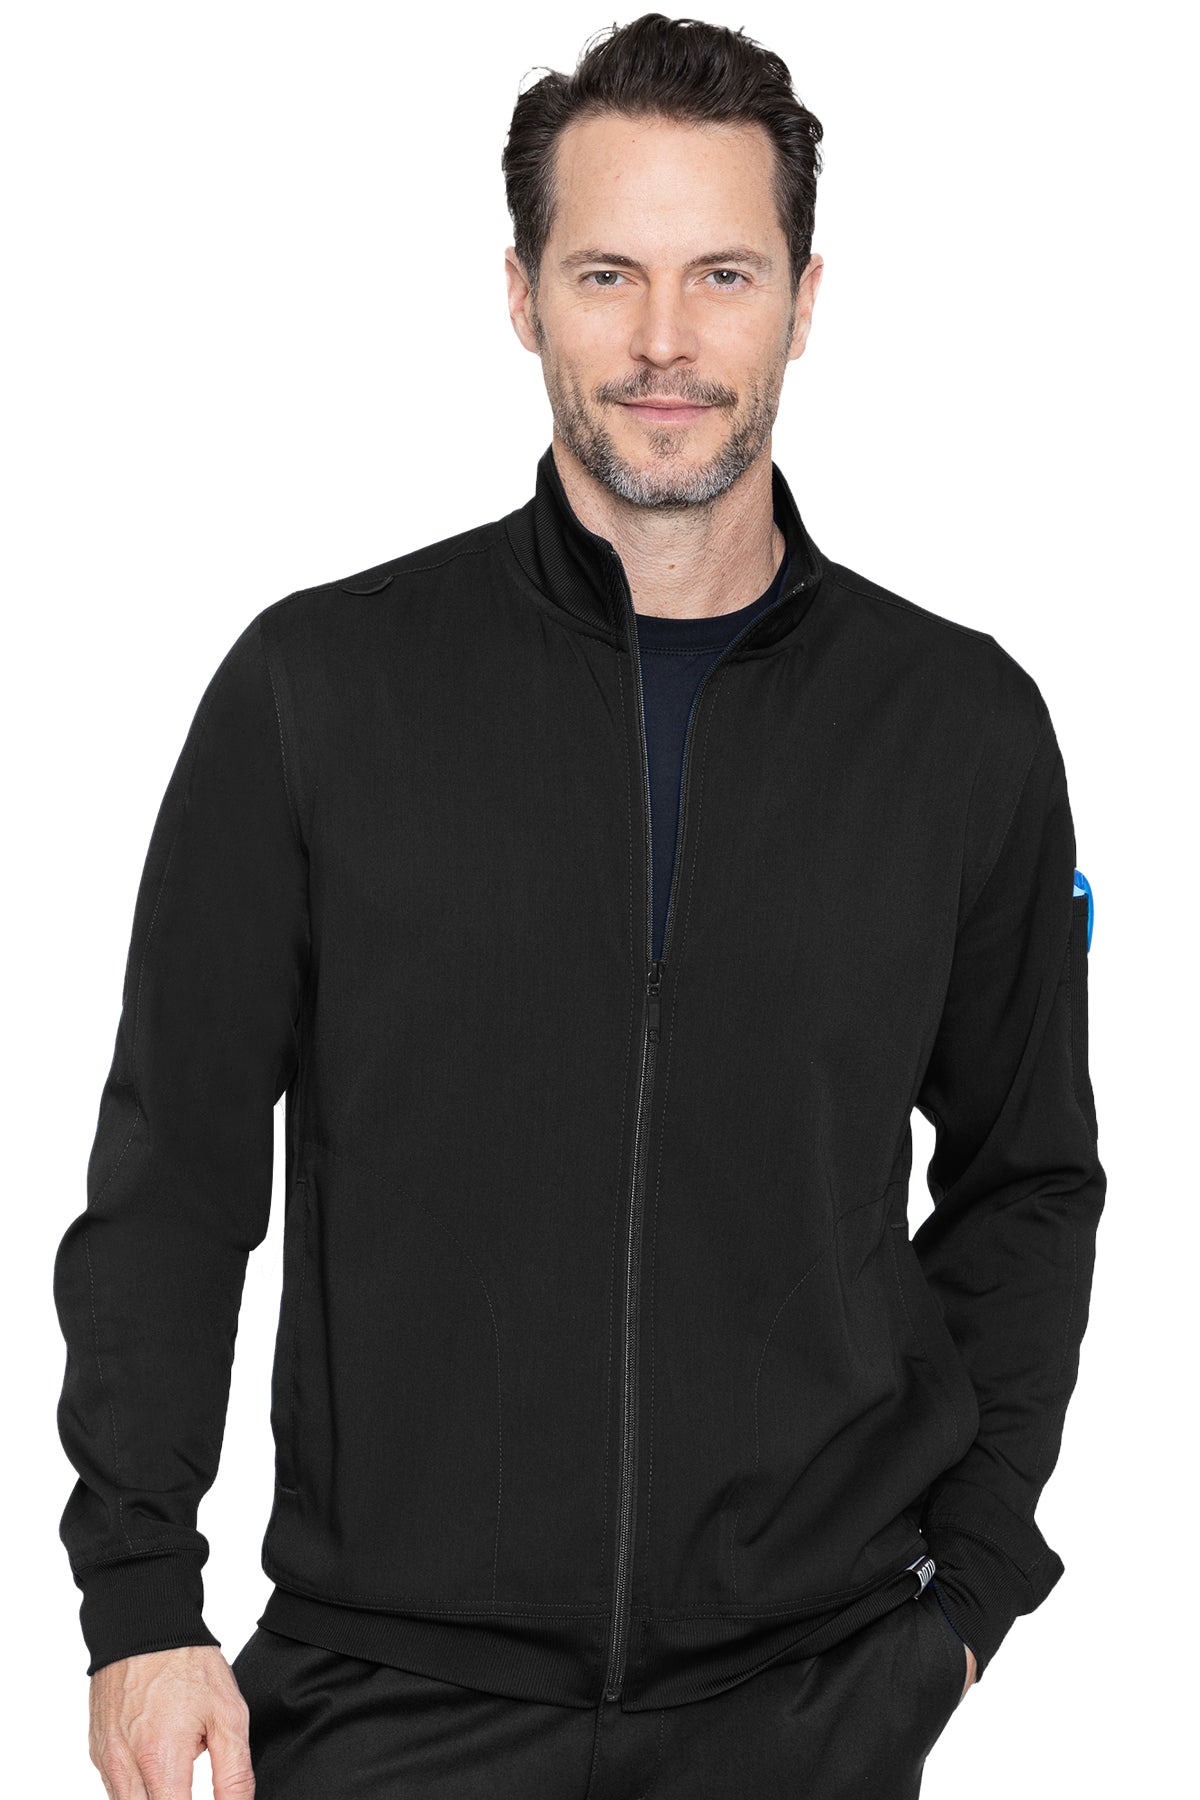 Med Couture Mens Scrub Jacket RothWear Orion Warmup in Black at Parker's Clothing and Shoes.